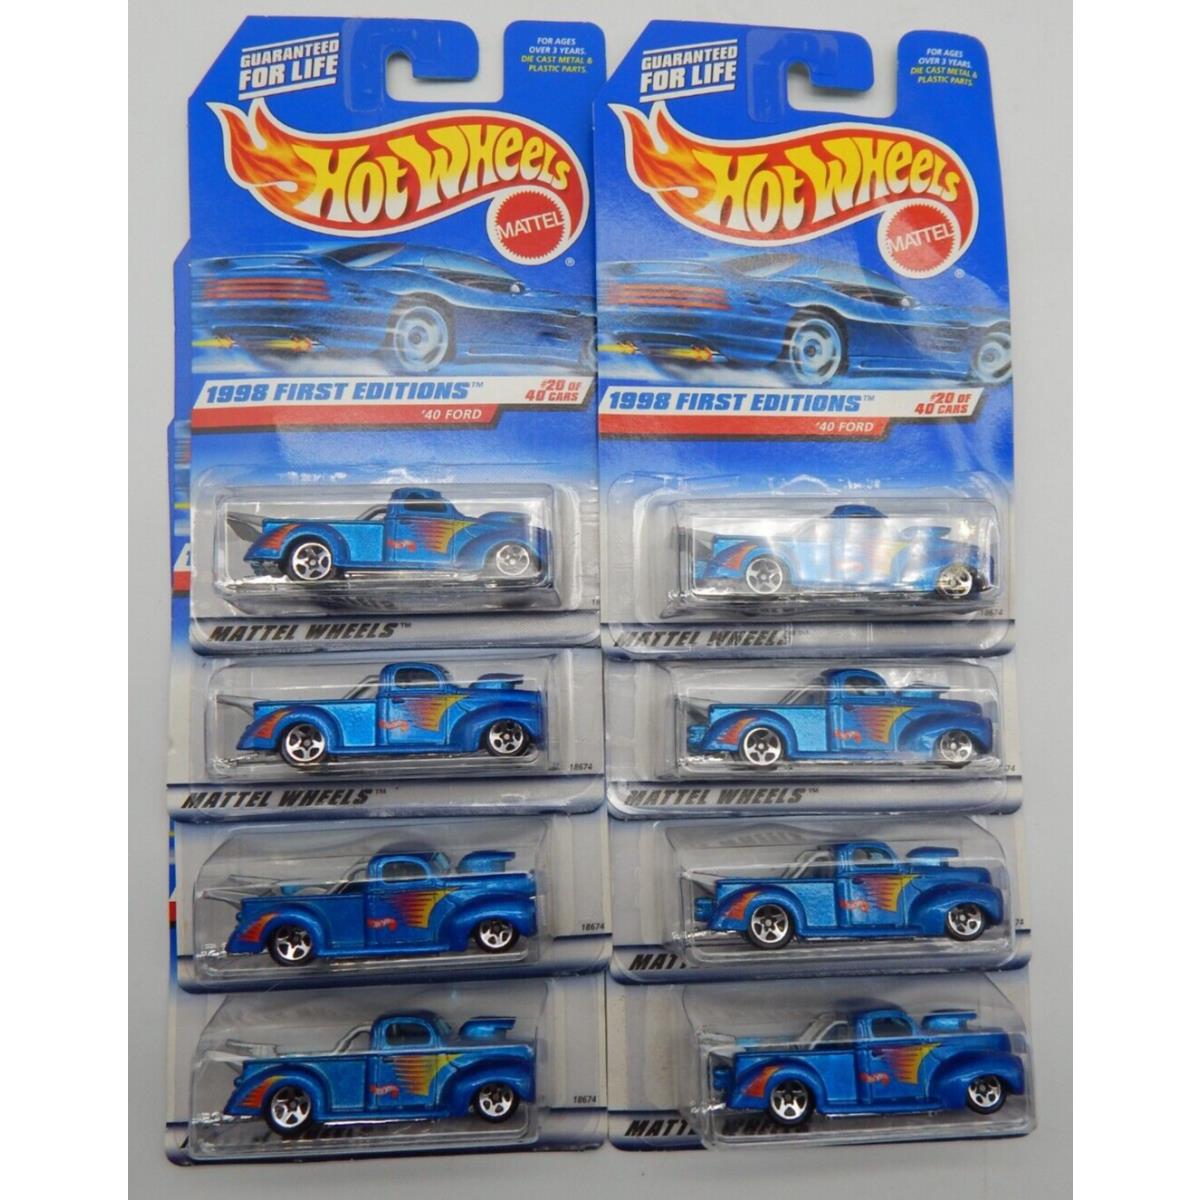 8 - Hot Wheels 1998 First Ed. `40 Ford Collector 654 Blue Variant 20/40 RTC132